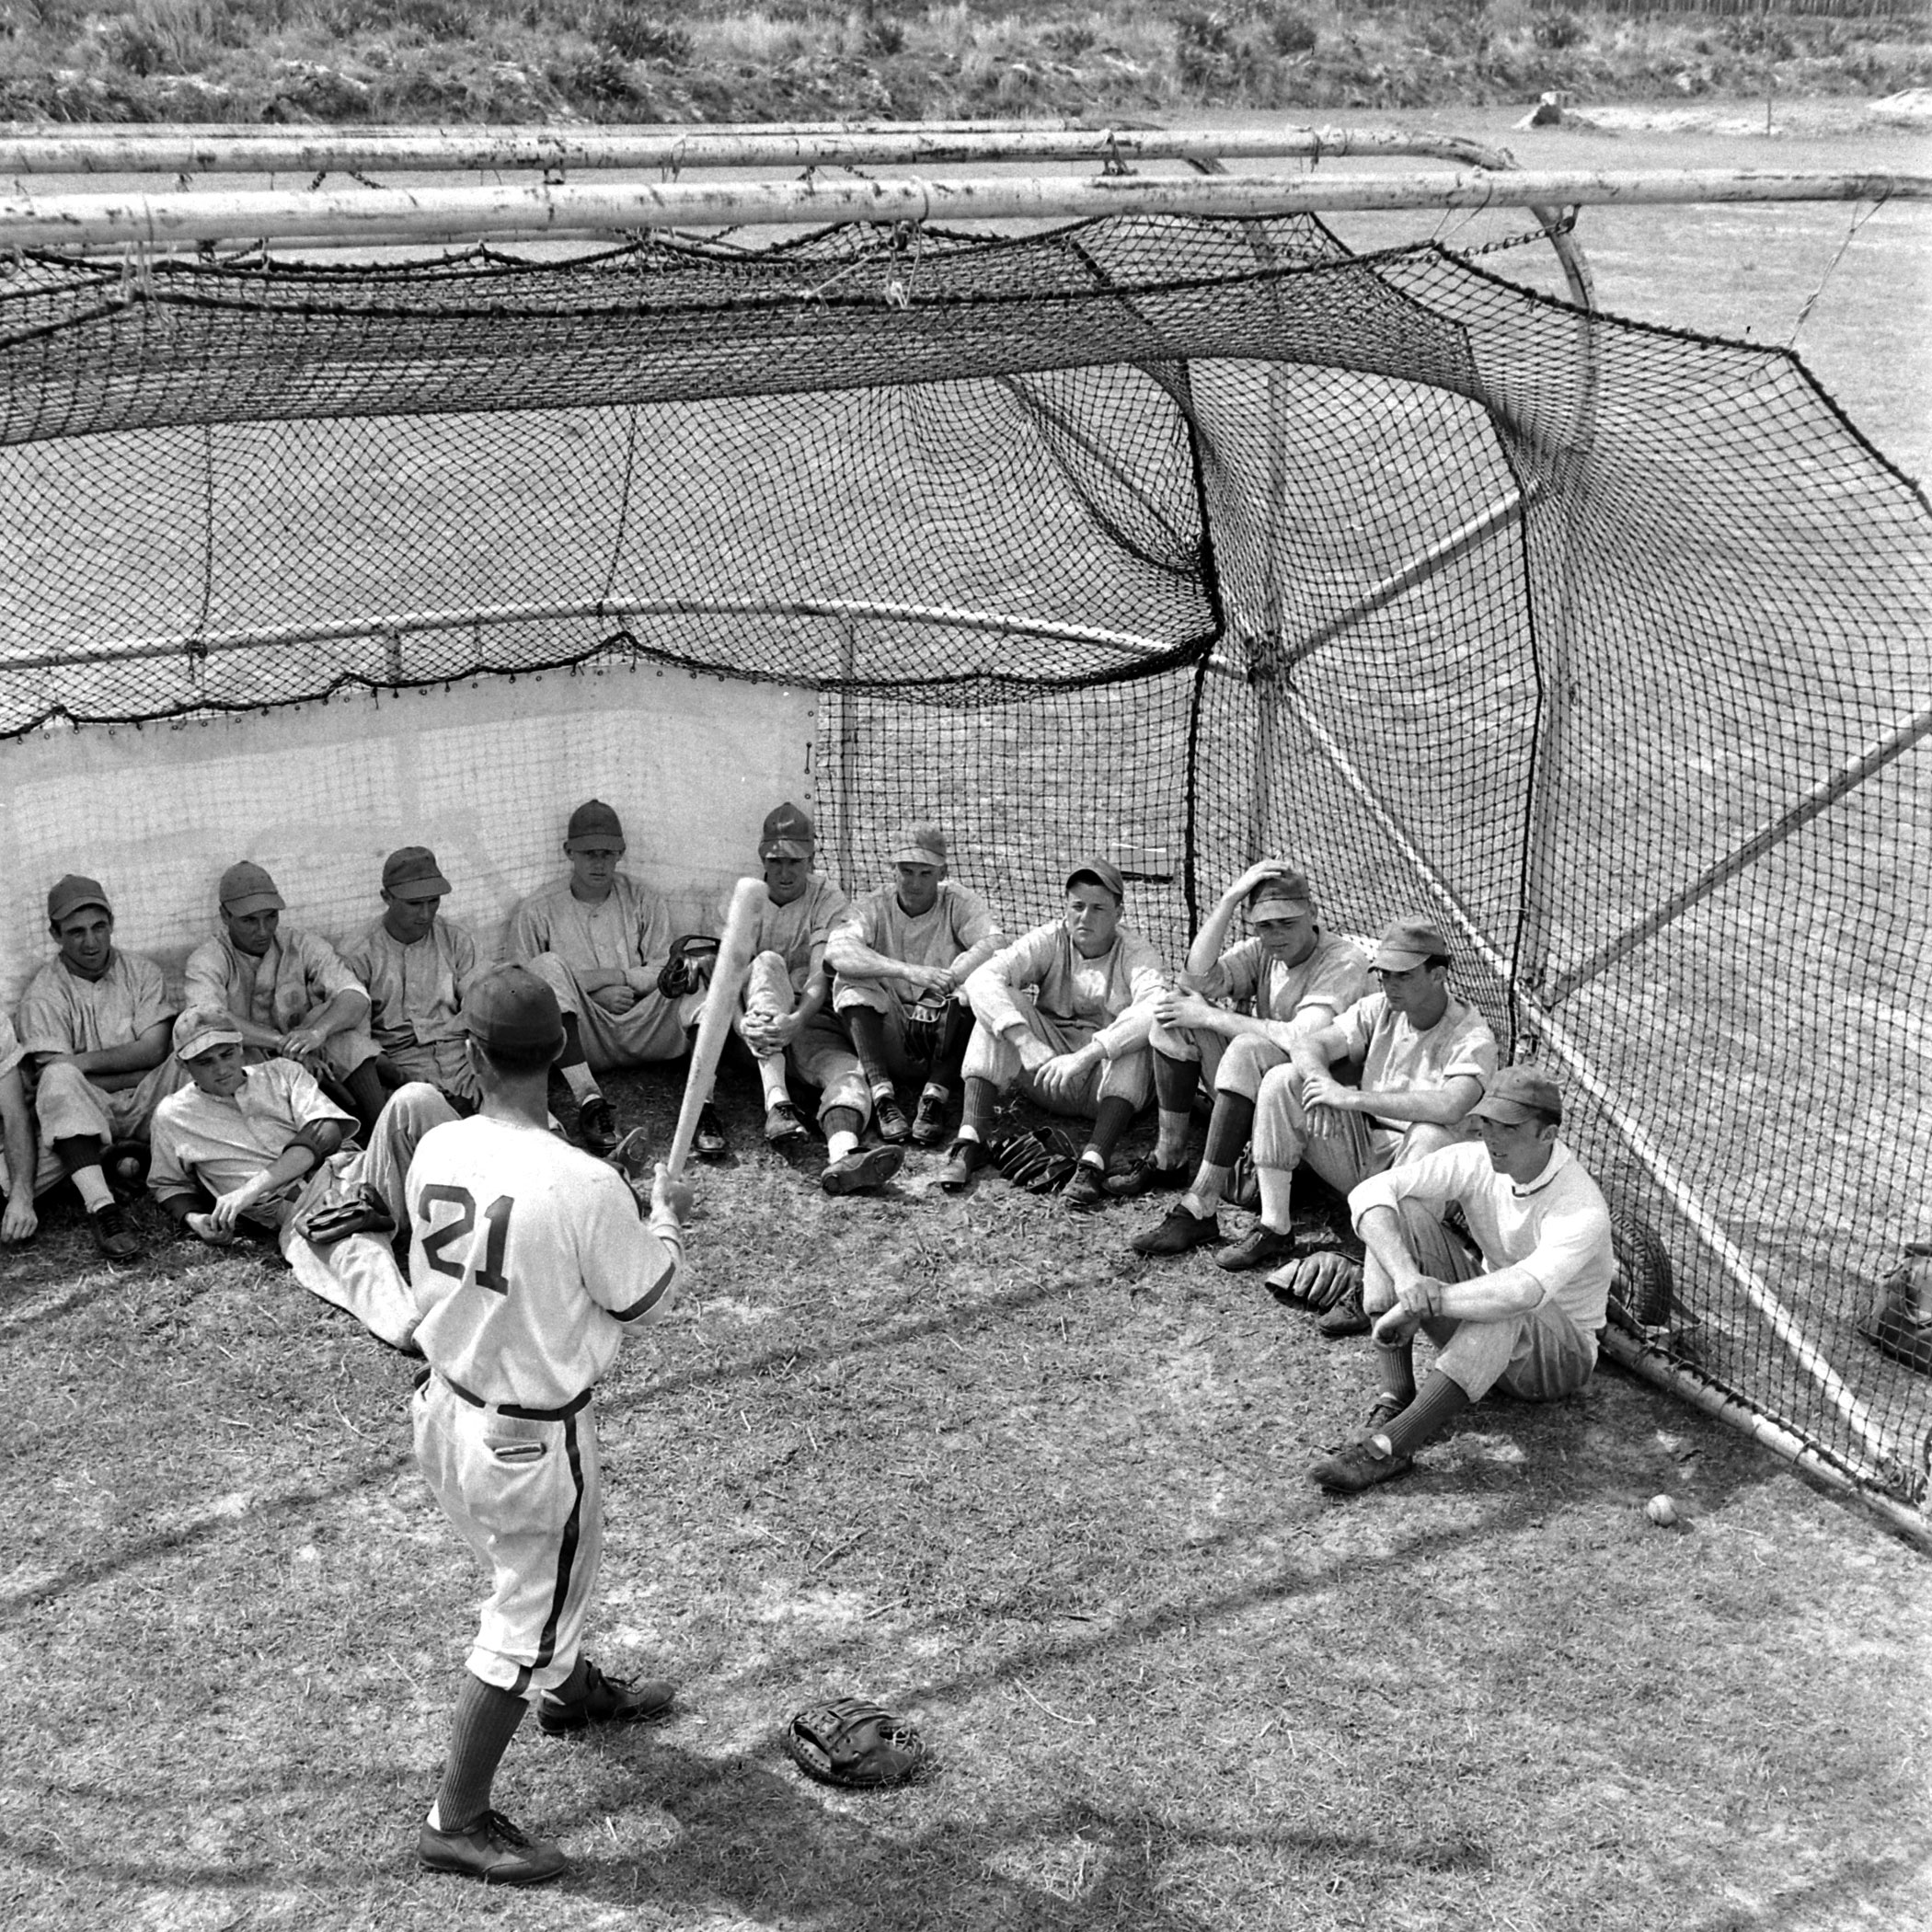 Dodgers rookies and prospects listen to a hitting instructor, Vero Beach, Fla., 1948.